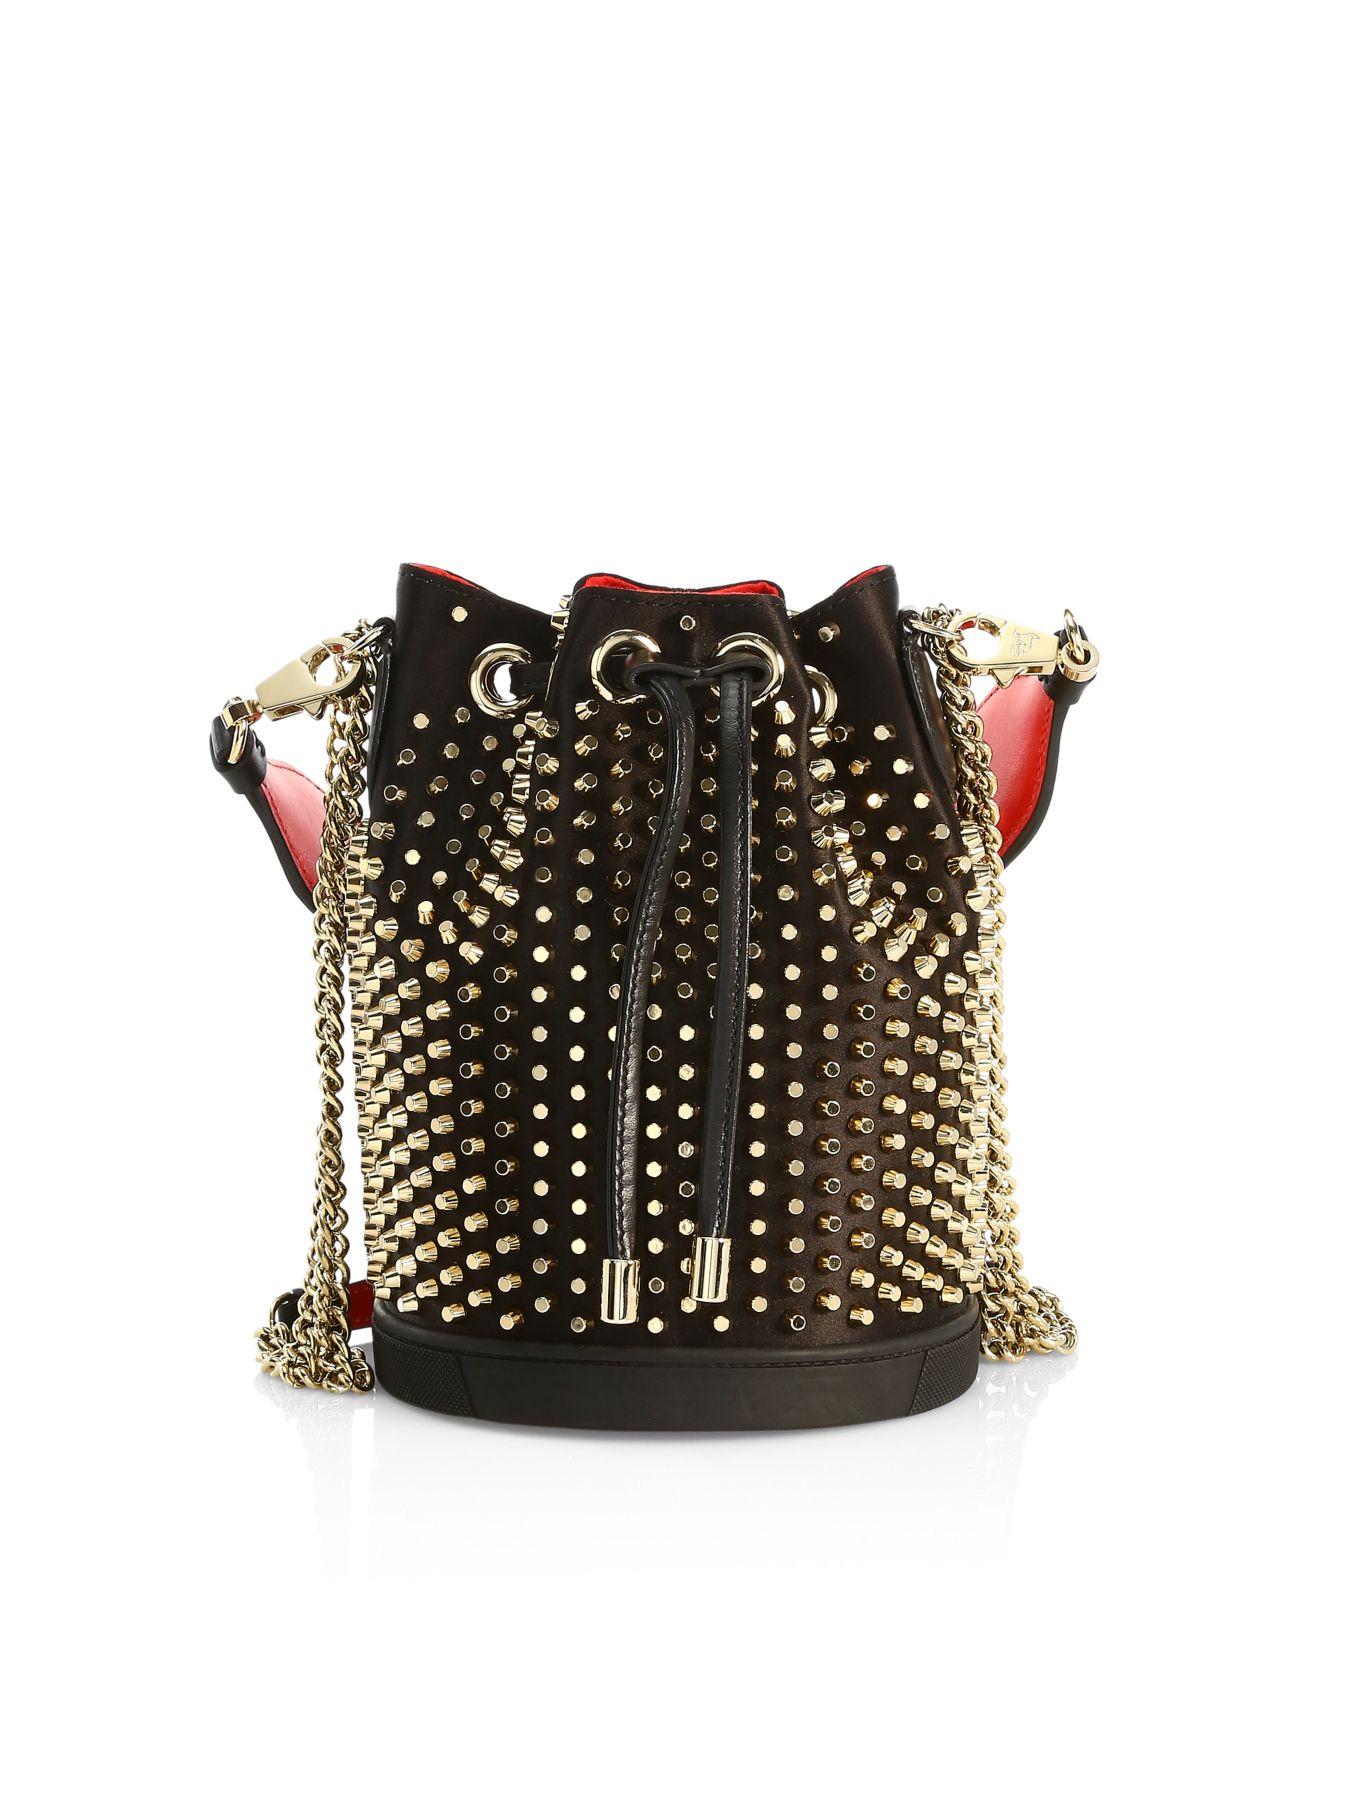 Christian Louboutin Marie Jane Studded Leather Bucket Bag in Black | Lyst